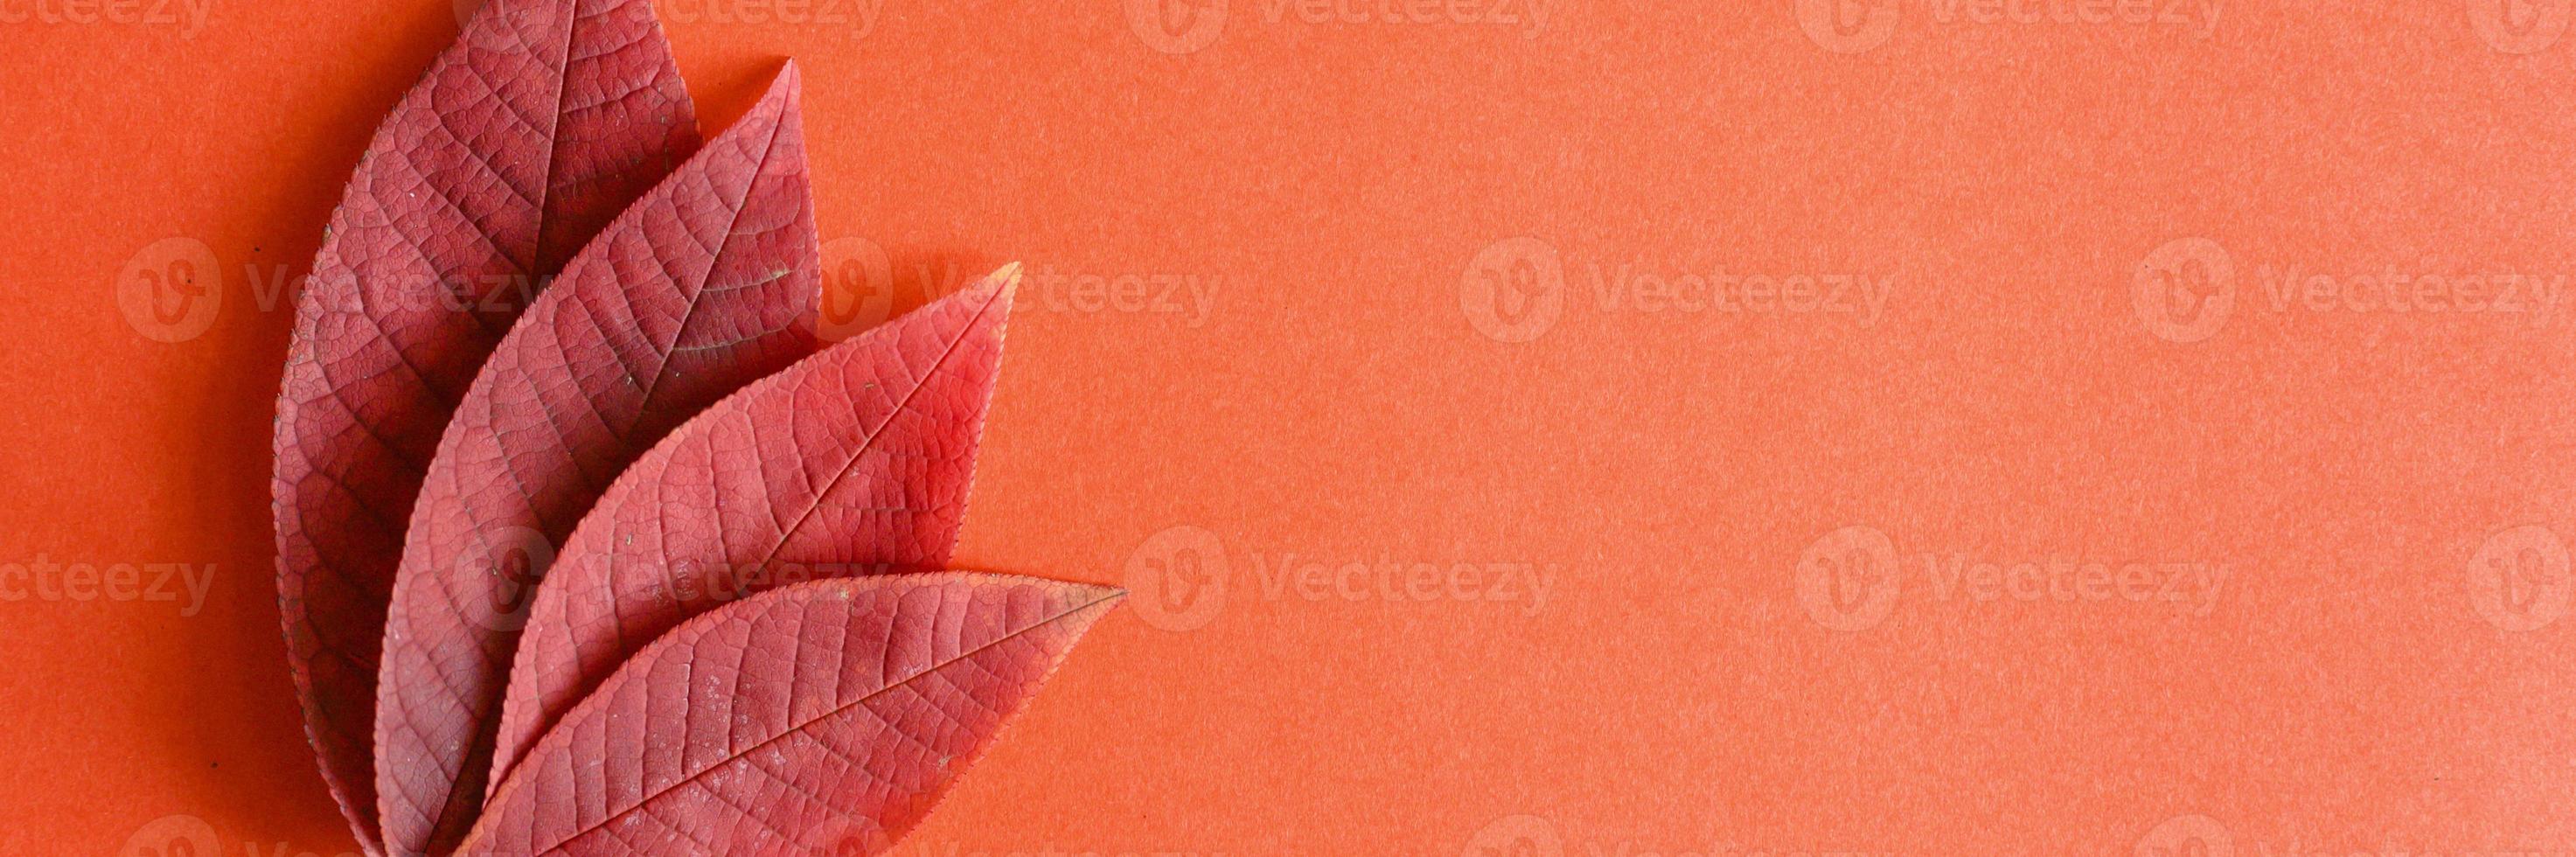 Red fallen autumn cherry leaves on a red paper background photo